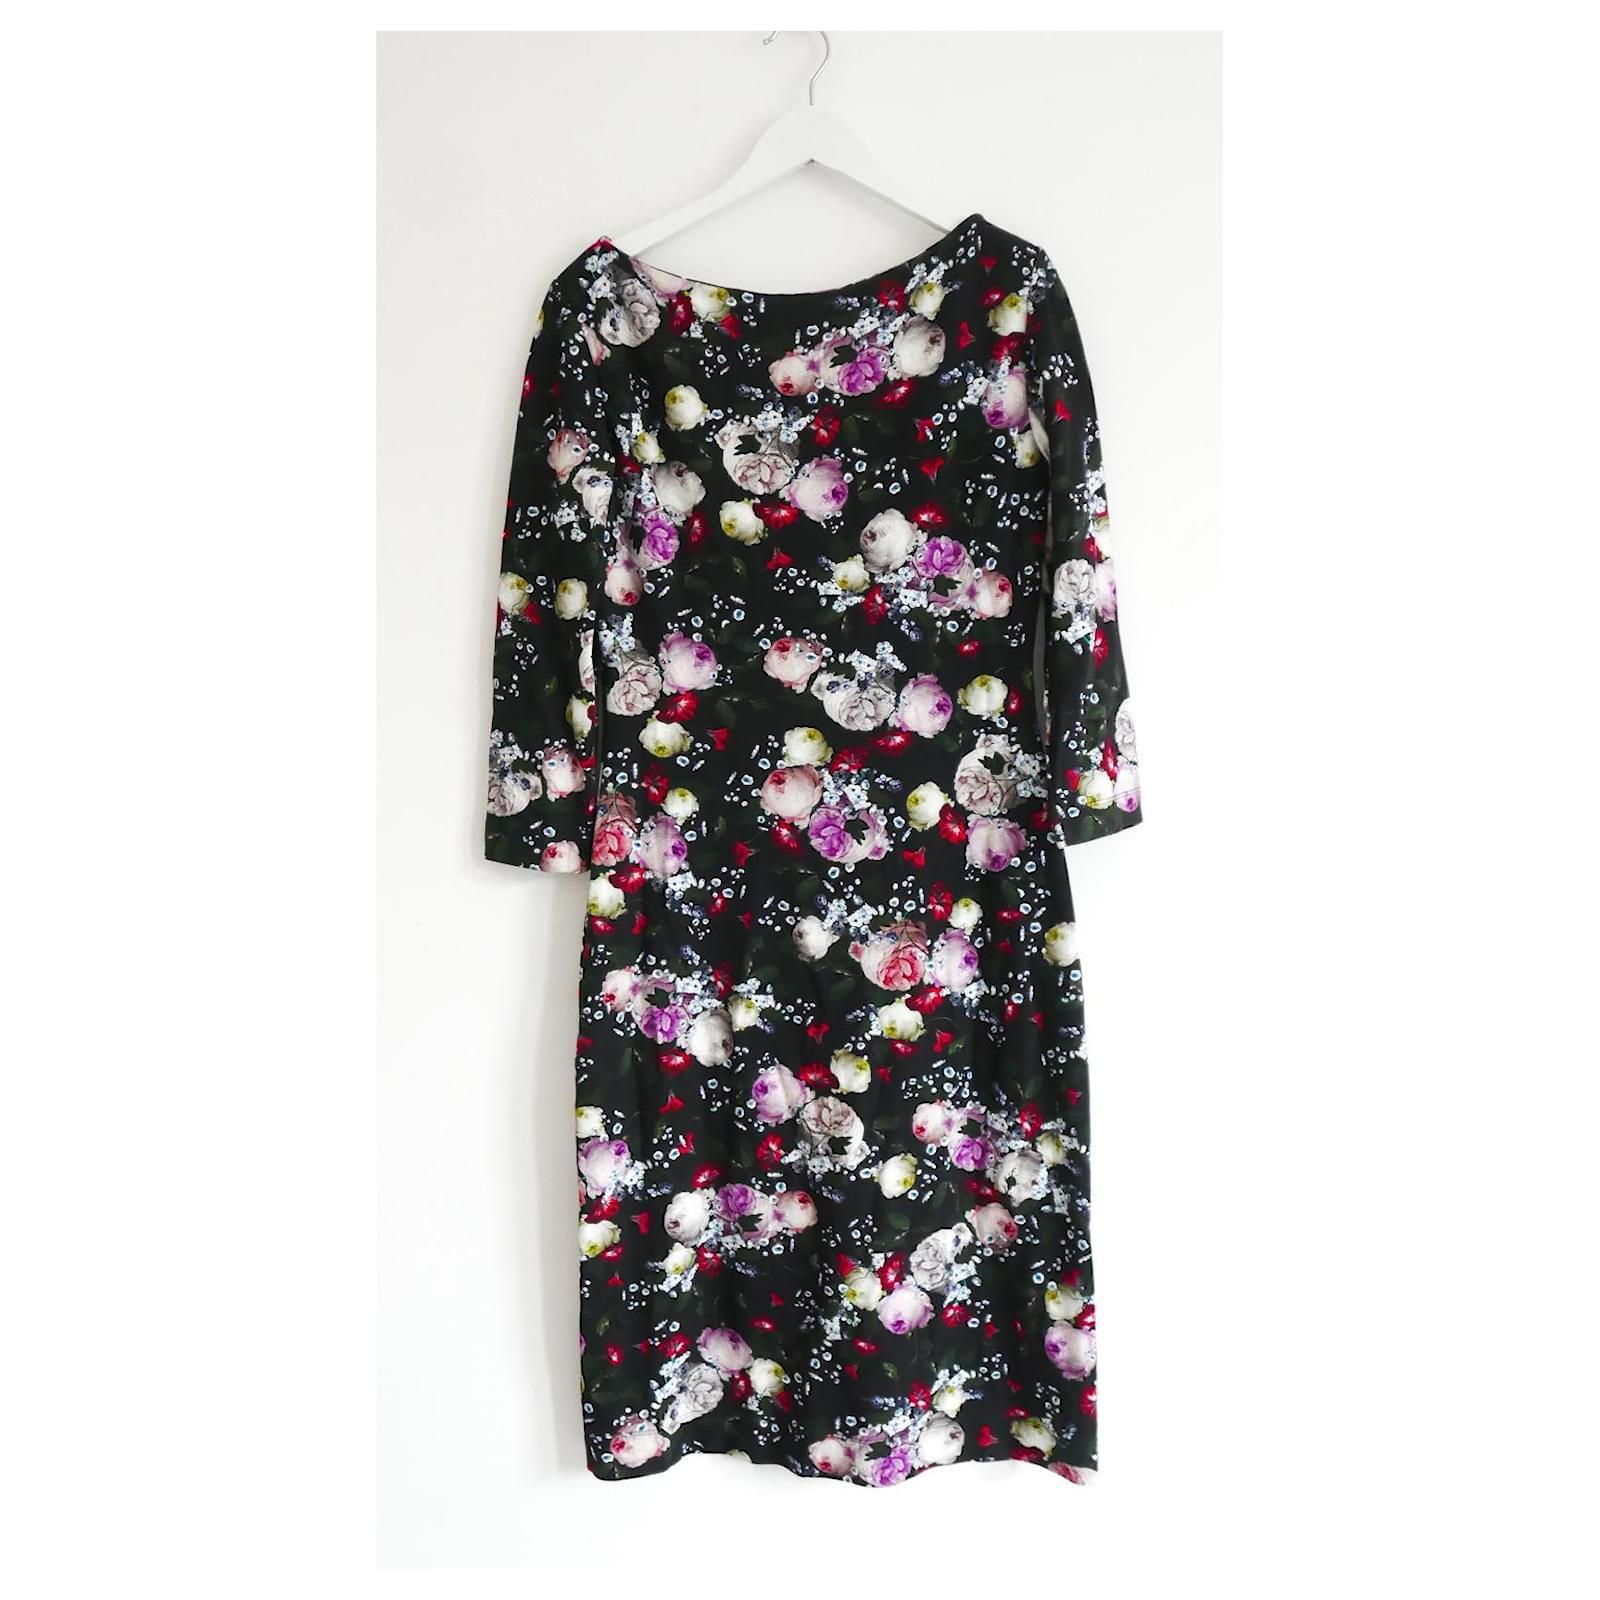 Erdem Reese Peony Print Floral Dress In New Condition For Sale In London, GB